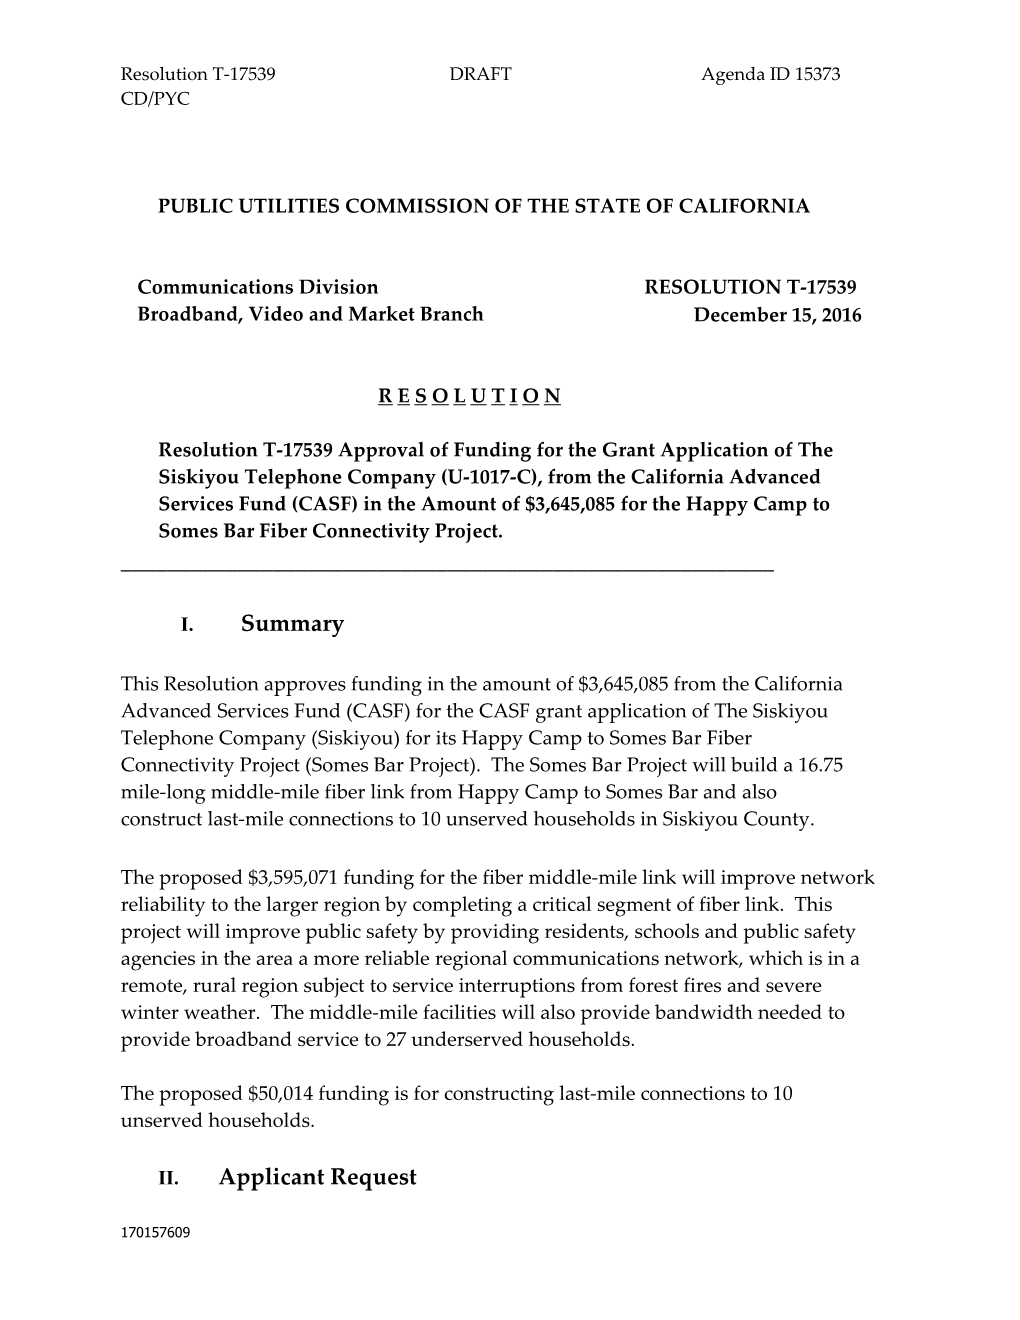 Public Utilities Commission of the State of California s81